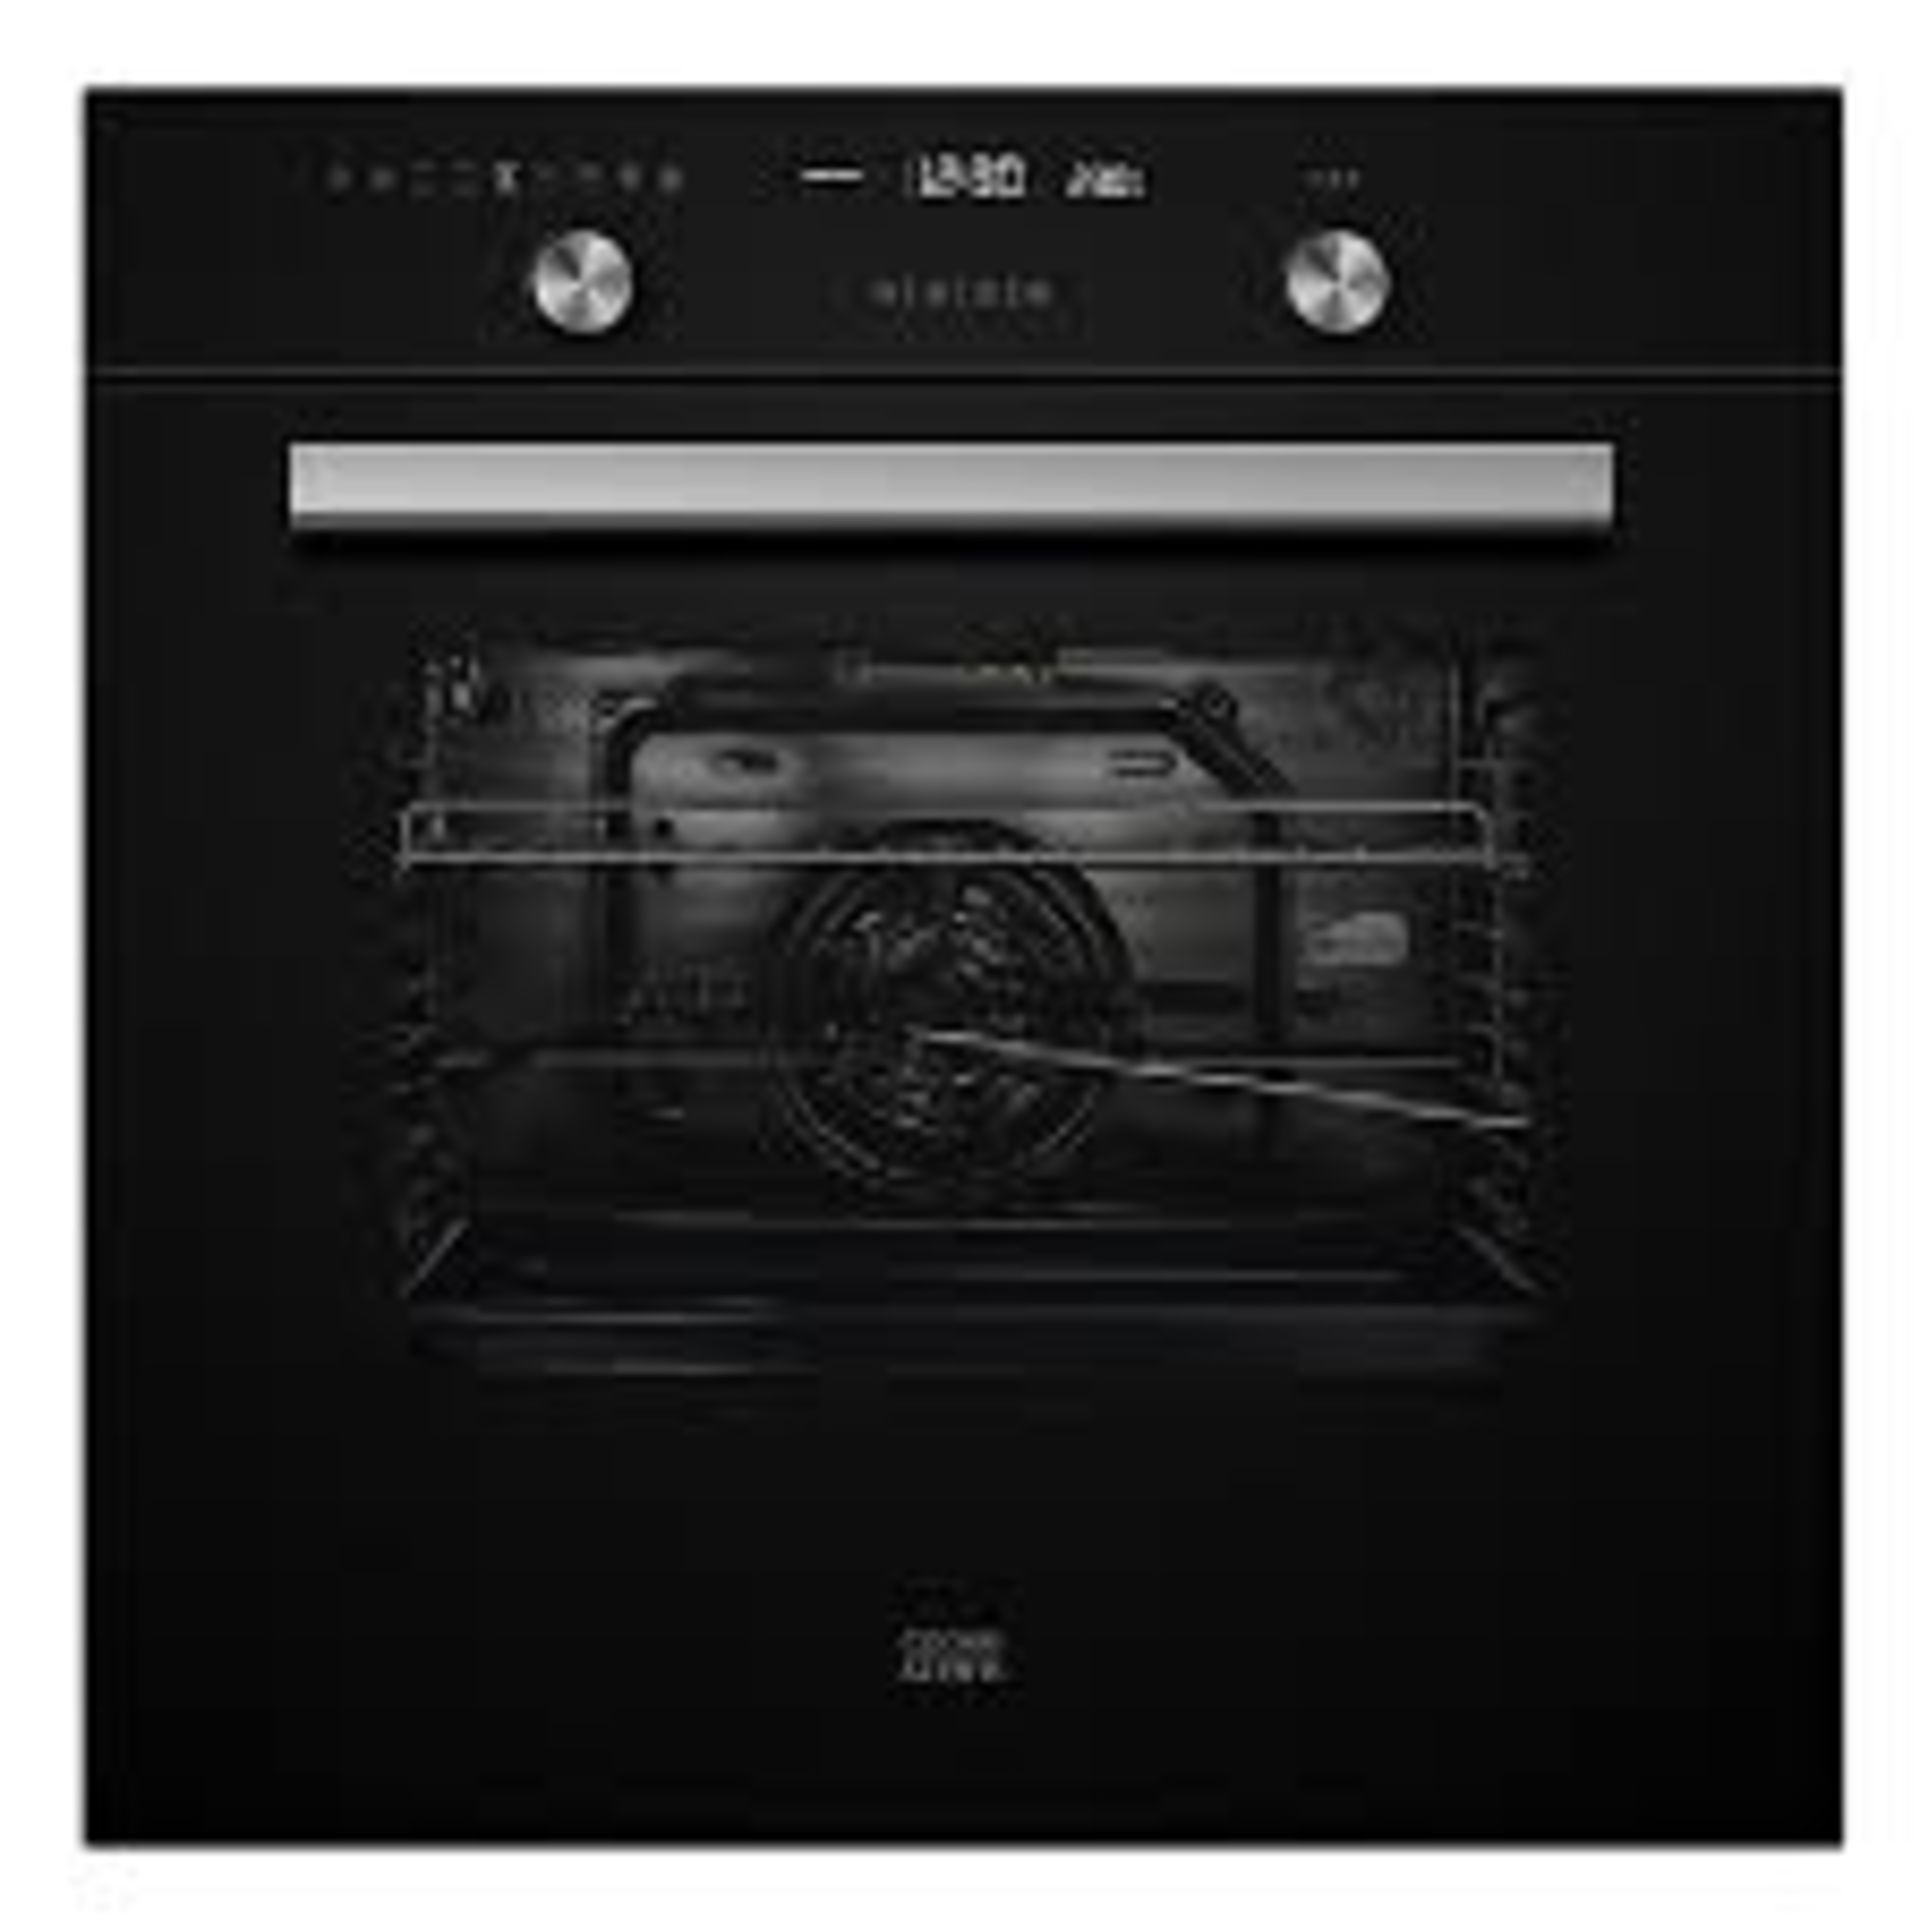 Cooke & Lewis CLMFBLa Built-in Single Multifunction Oven - Black. - R19.10.